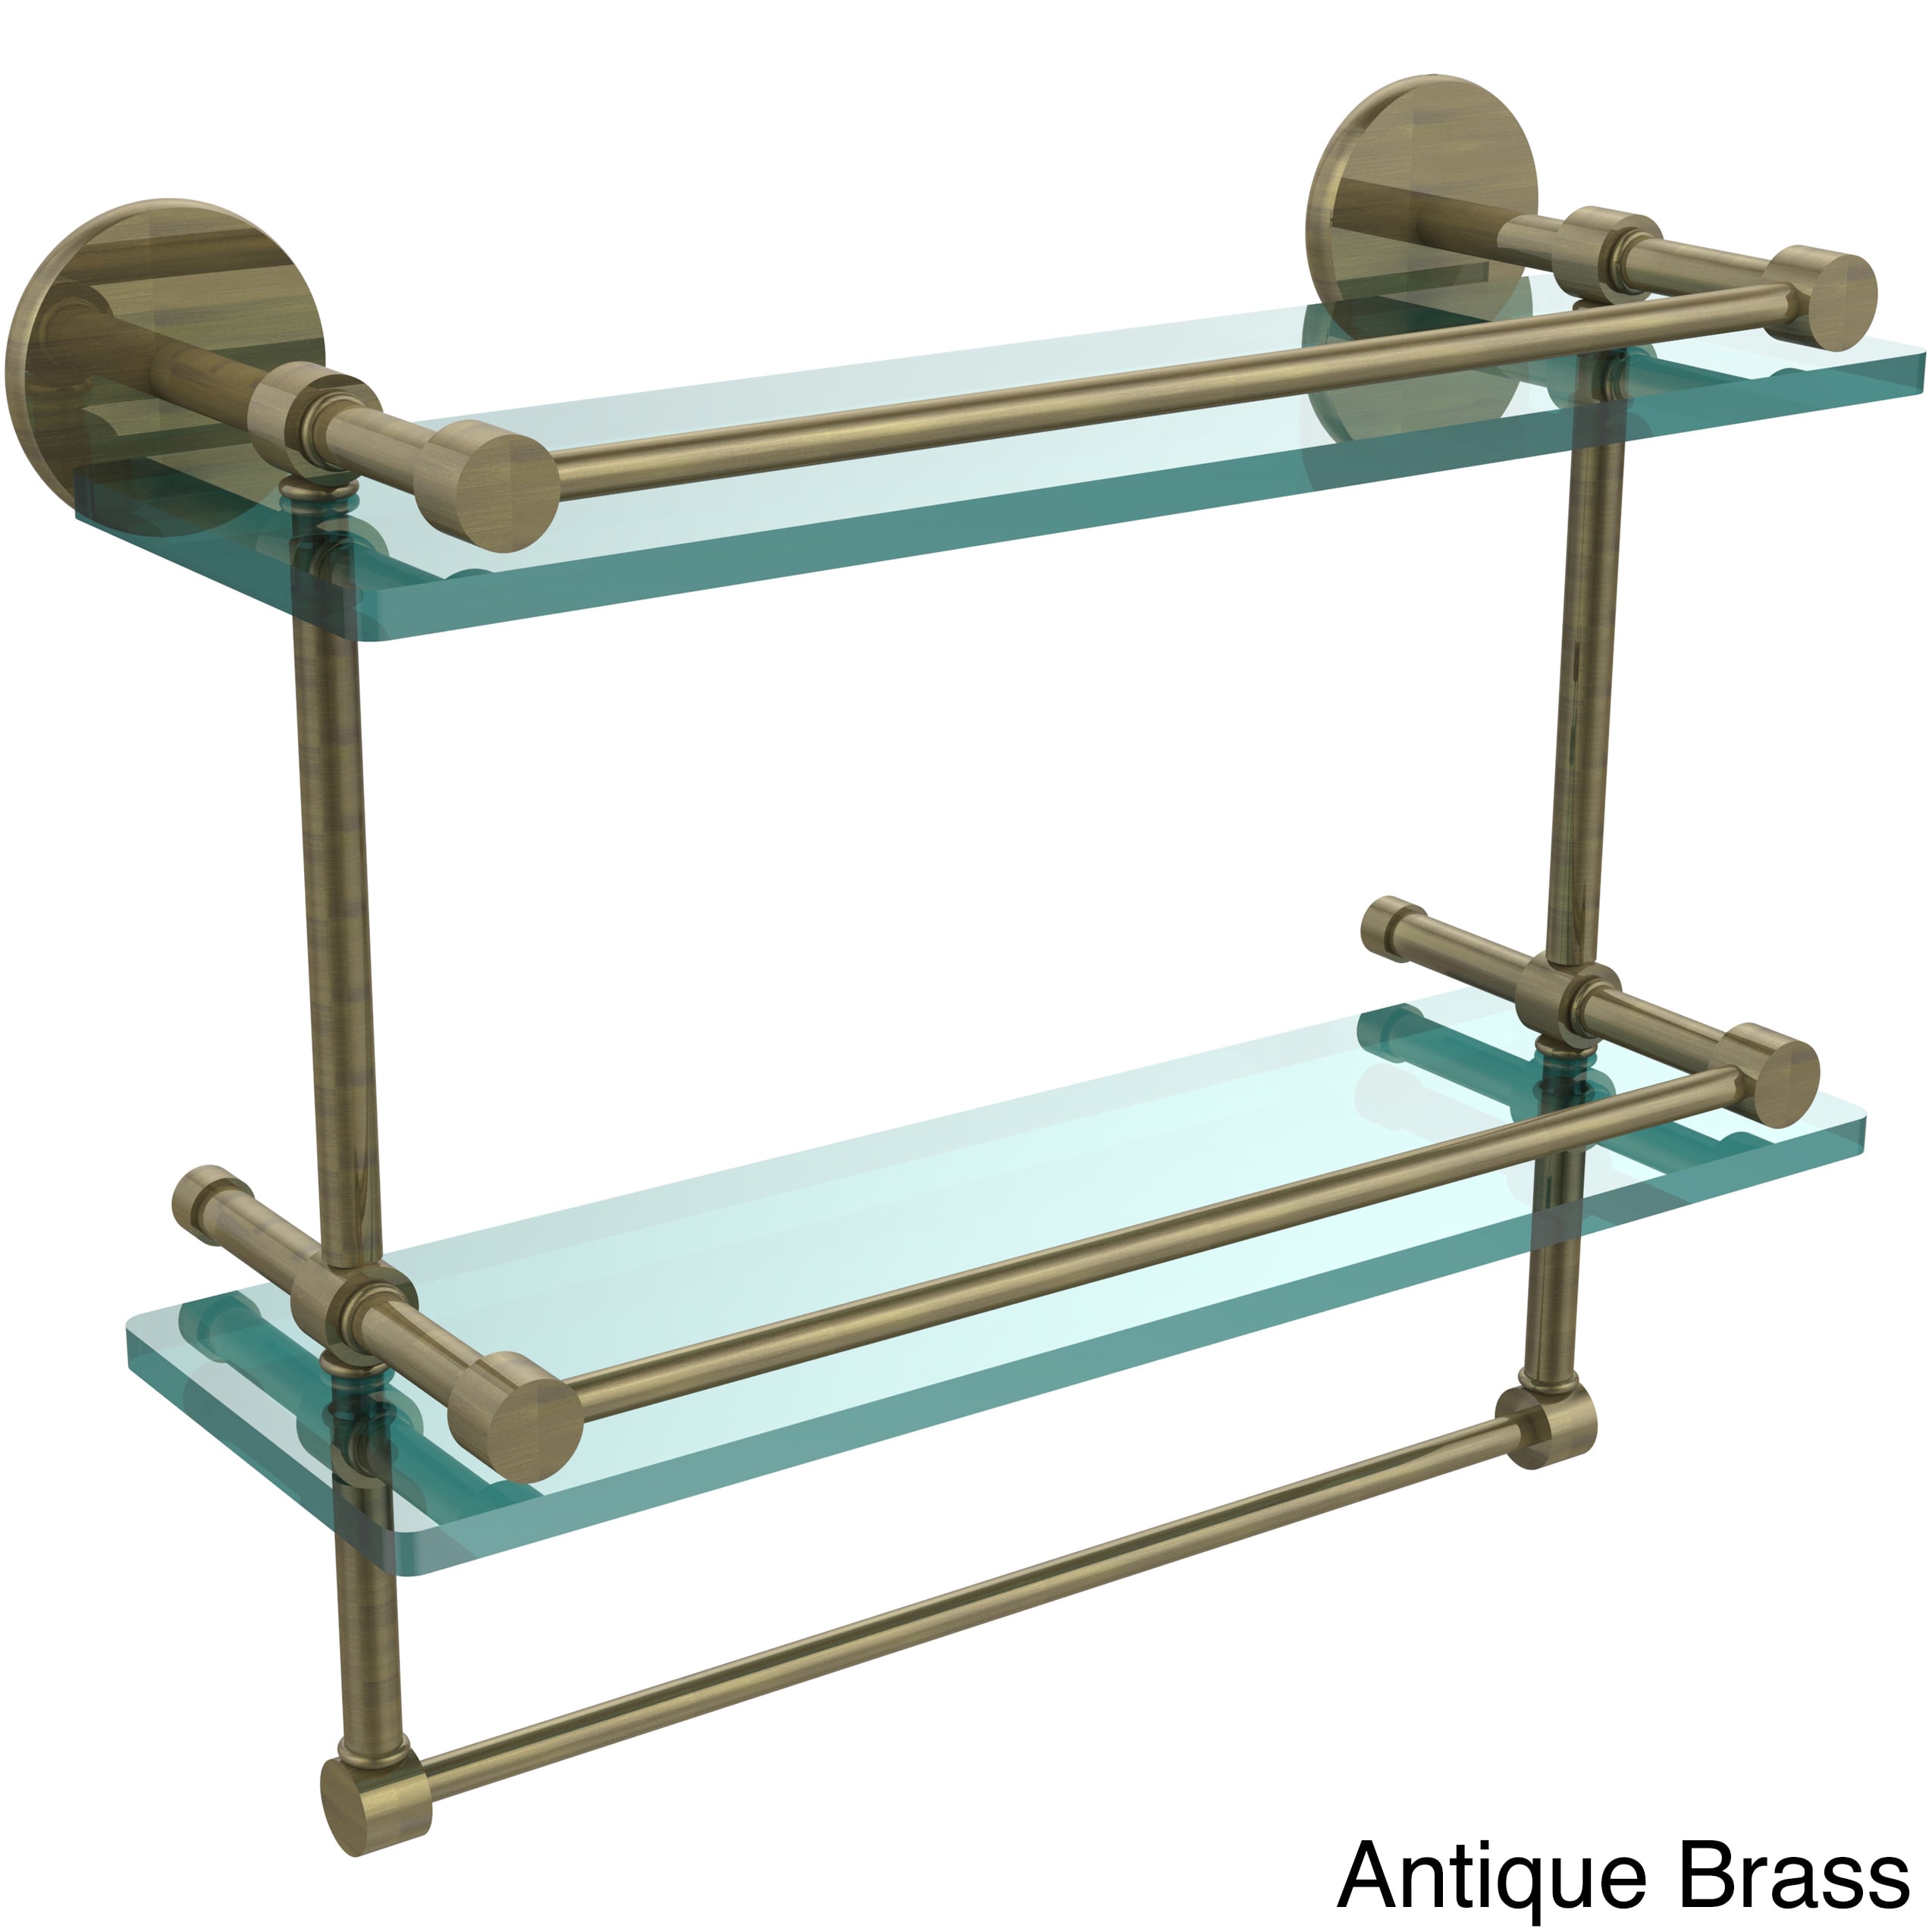 16 Inch Gallery Double Glass Shelf with Towel Bar - P1000-2TB/16-GAL-PC - image 5 of 5